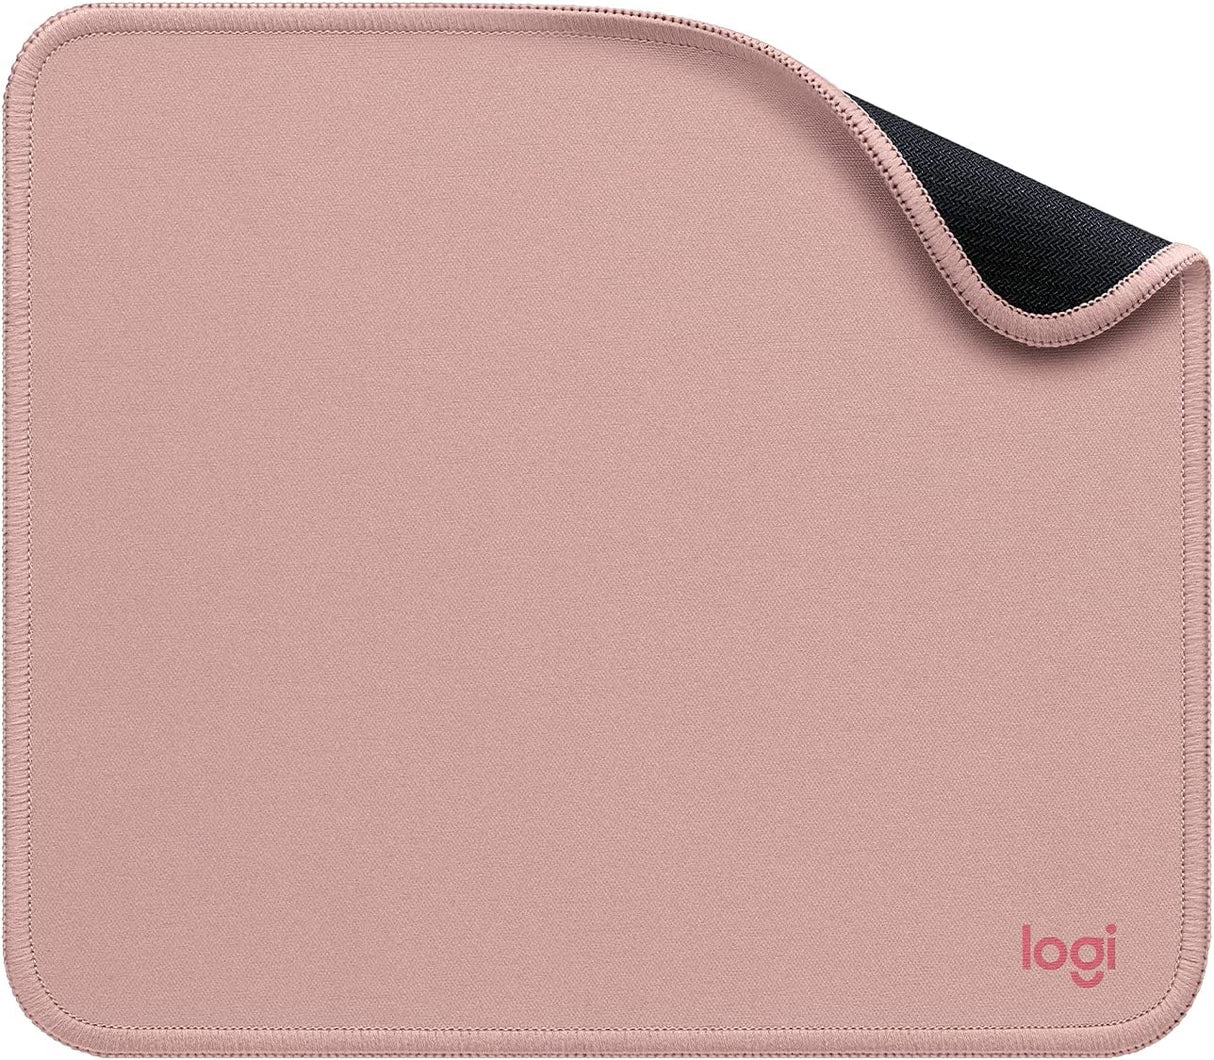 Logitech Mouse Pad - Studio Series, Computer Mouse Mat with Anti-Slip Rubber Base, Easy Gliding, Spill-Resistant Surface, Durable Materials, Portable, in a Fresh Modern Design, Darker Rose